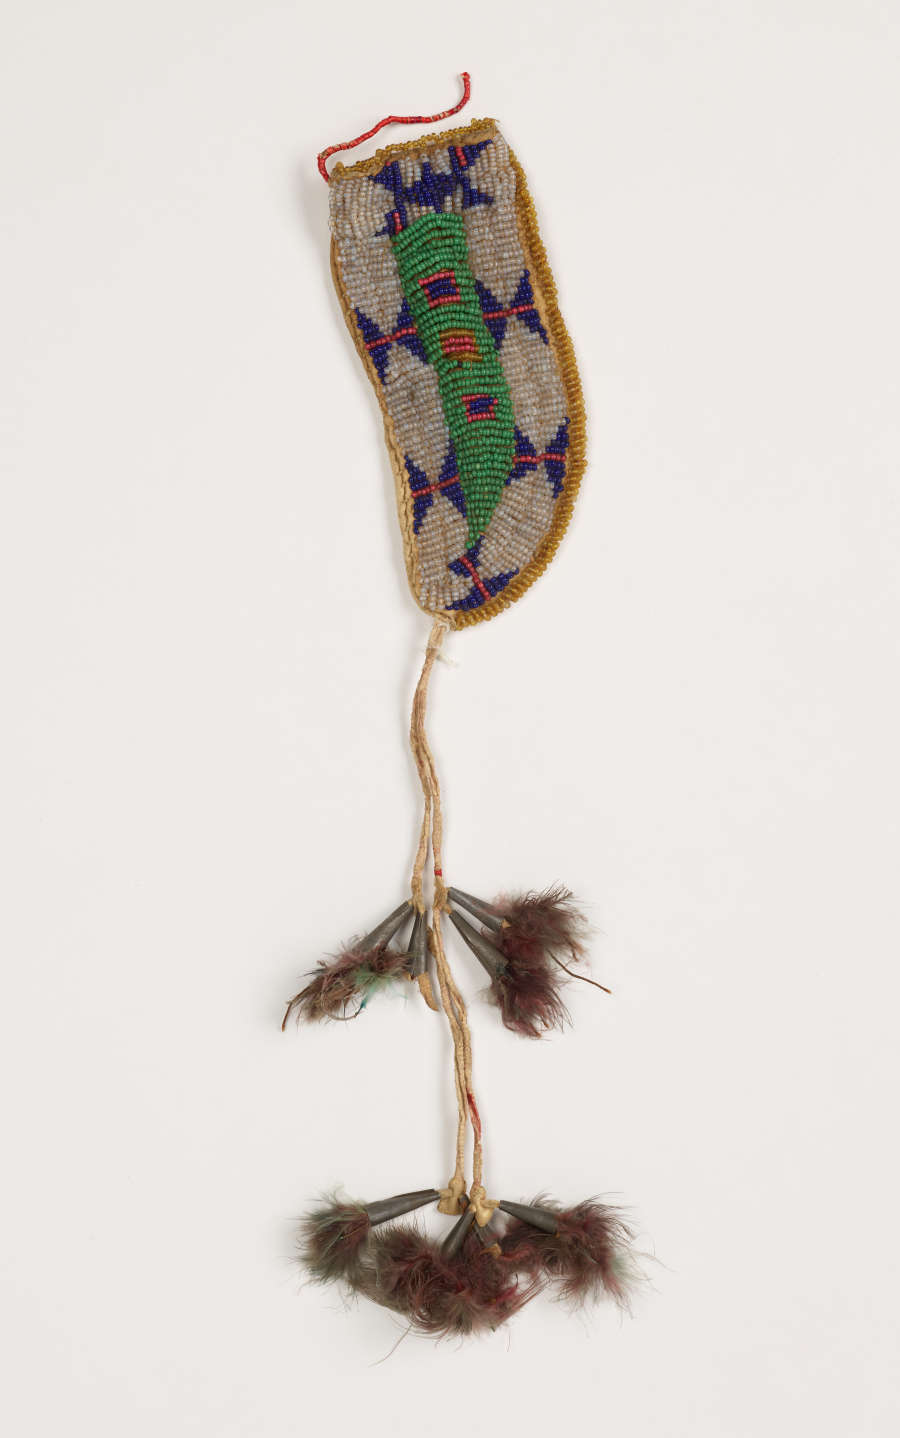 A beaded knife case with a thread coming from the tip, connecting to two sets of brown-red tassels. The case features a beaded green, blue, and orange geometric motif.